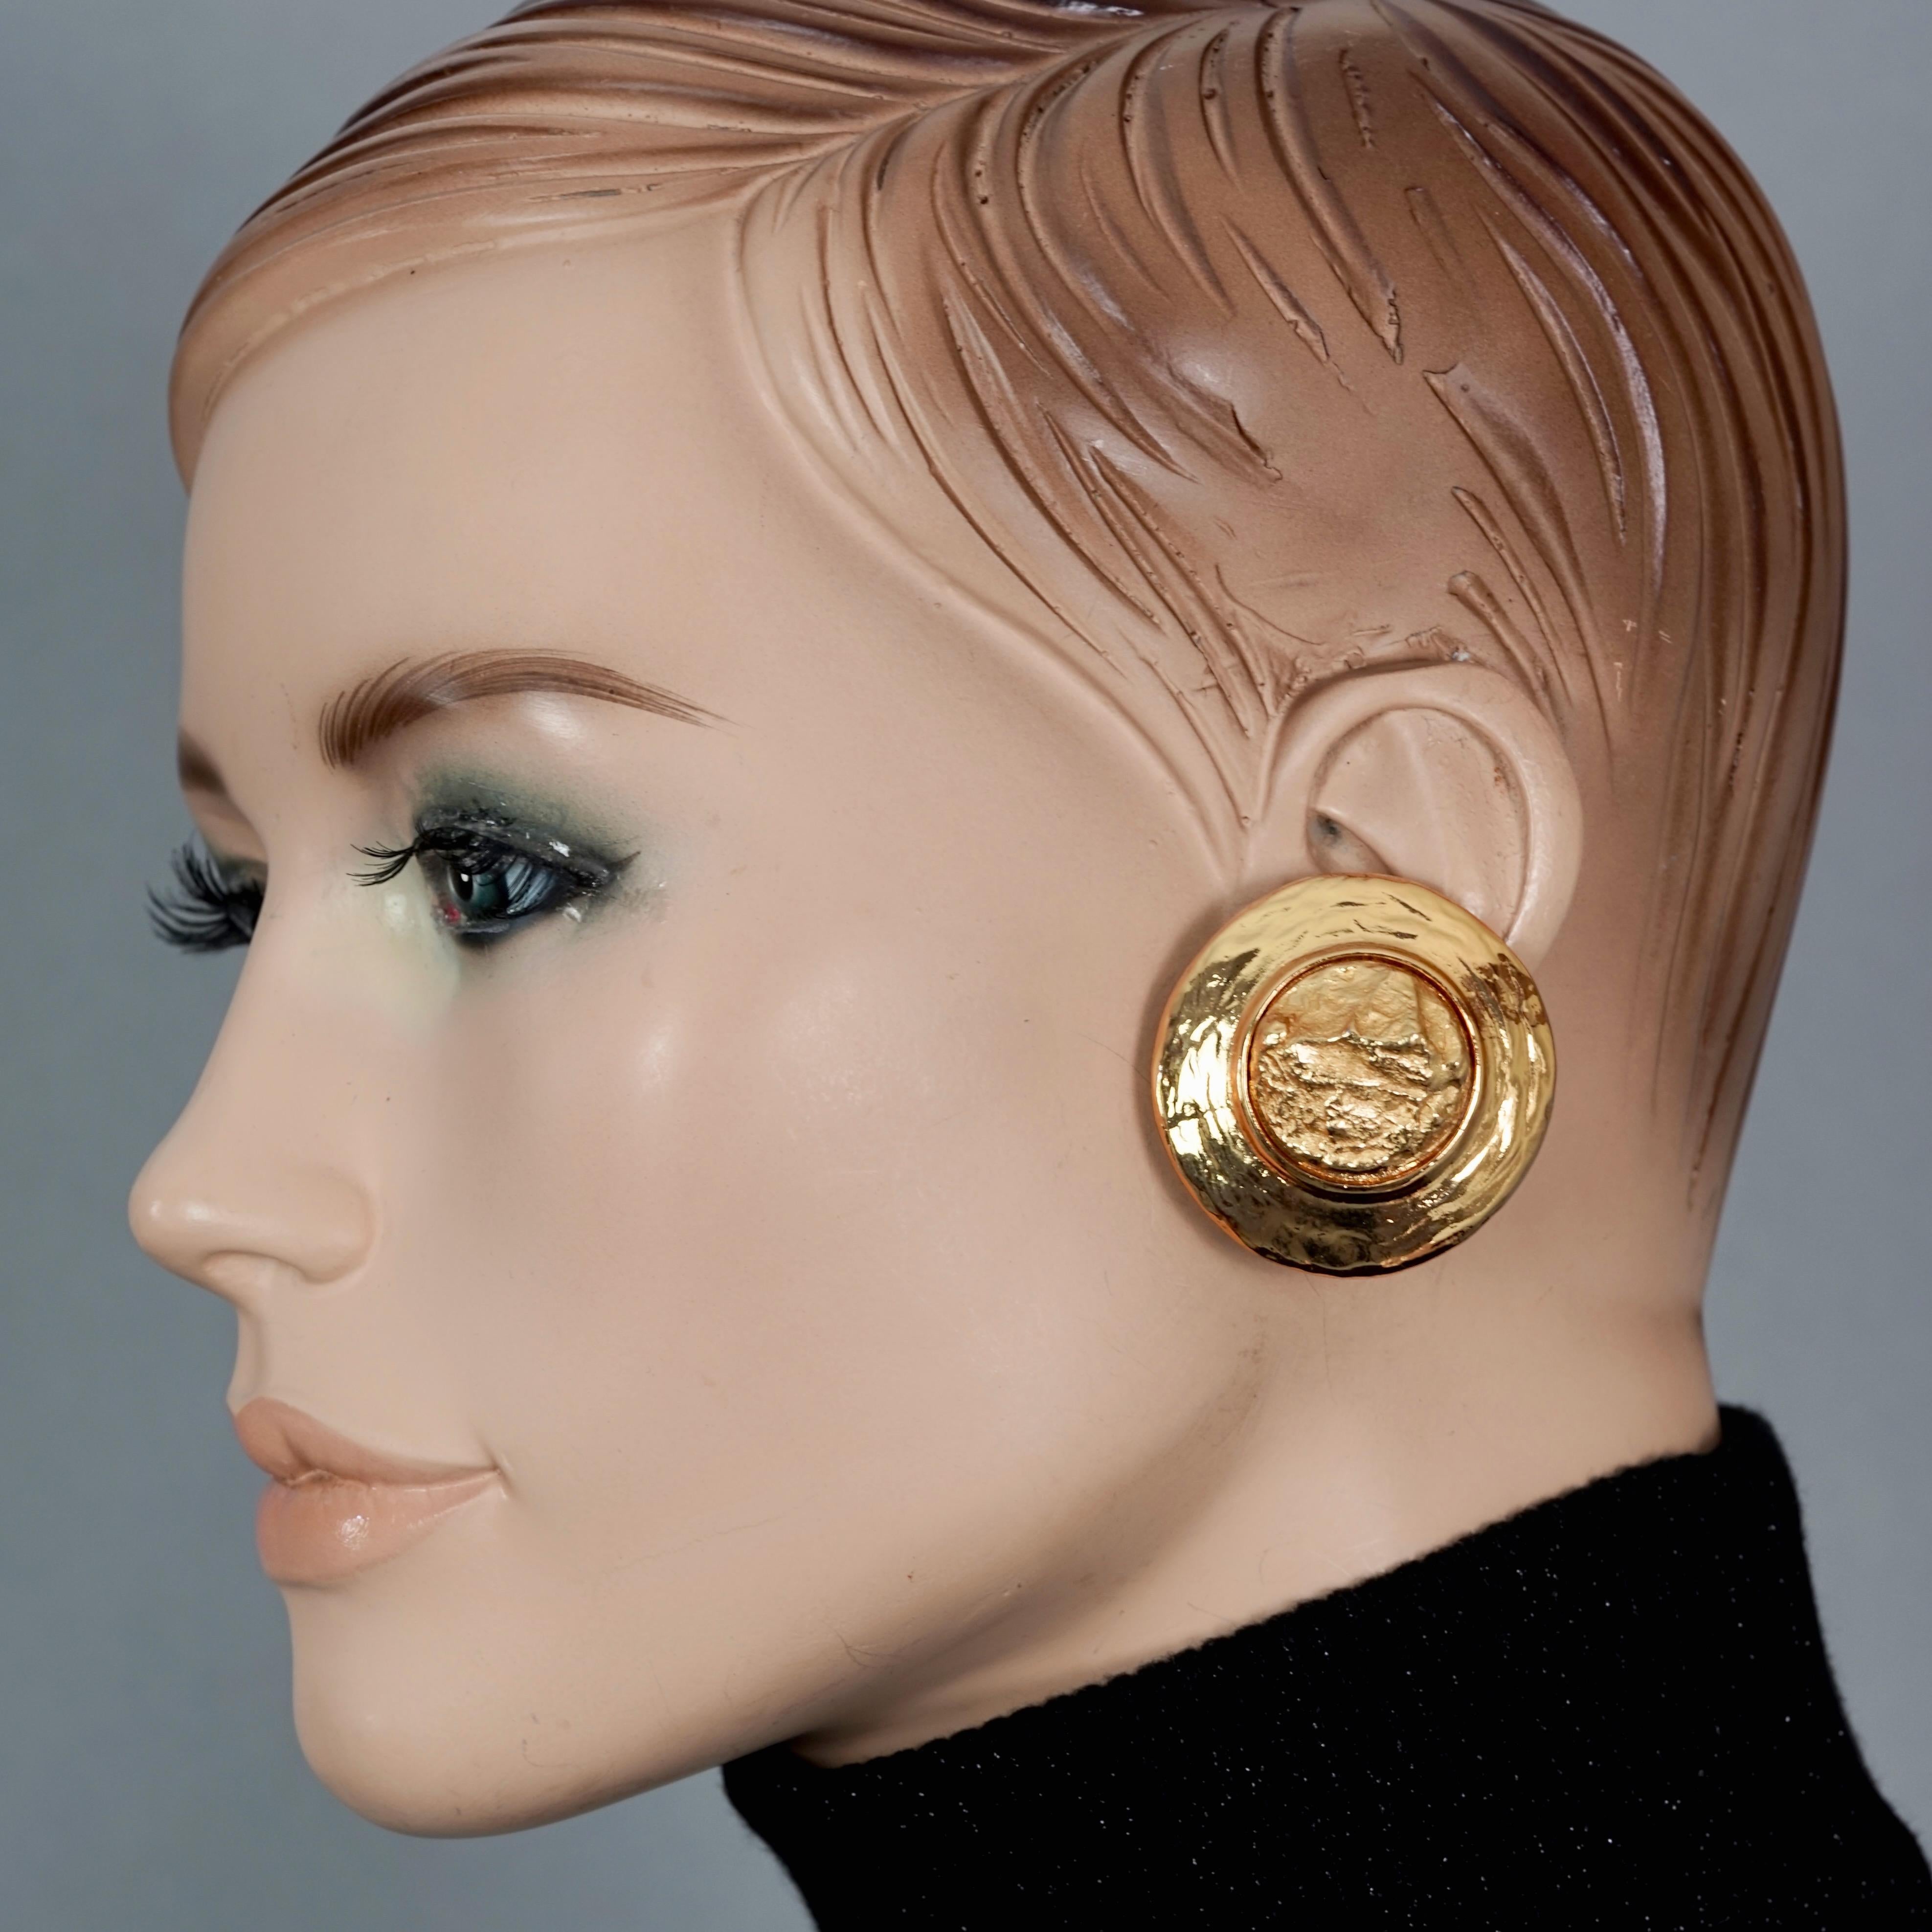 Vintage YVES SAINT LAURENT Ysl Textured Gold Round Earrings

Measurements:
Height: 1.61 inches (4.1 cm)
Width: 1.61 inches (4.1 cm)
Weight per Earring: 23 grams

Features:
- 100% Authentic YVES SAINT LAURENT.
- Round textured disc earrings.
- Clip